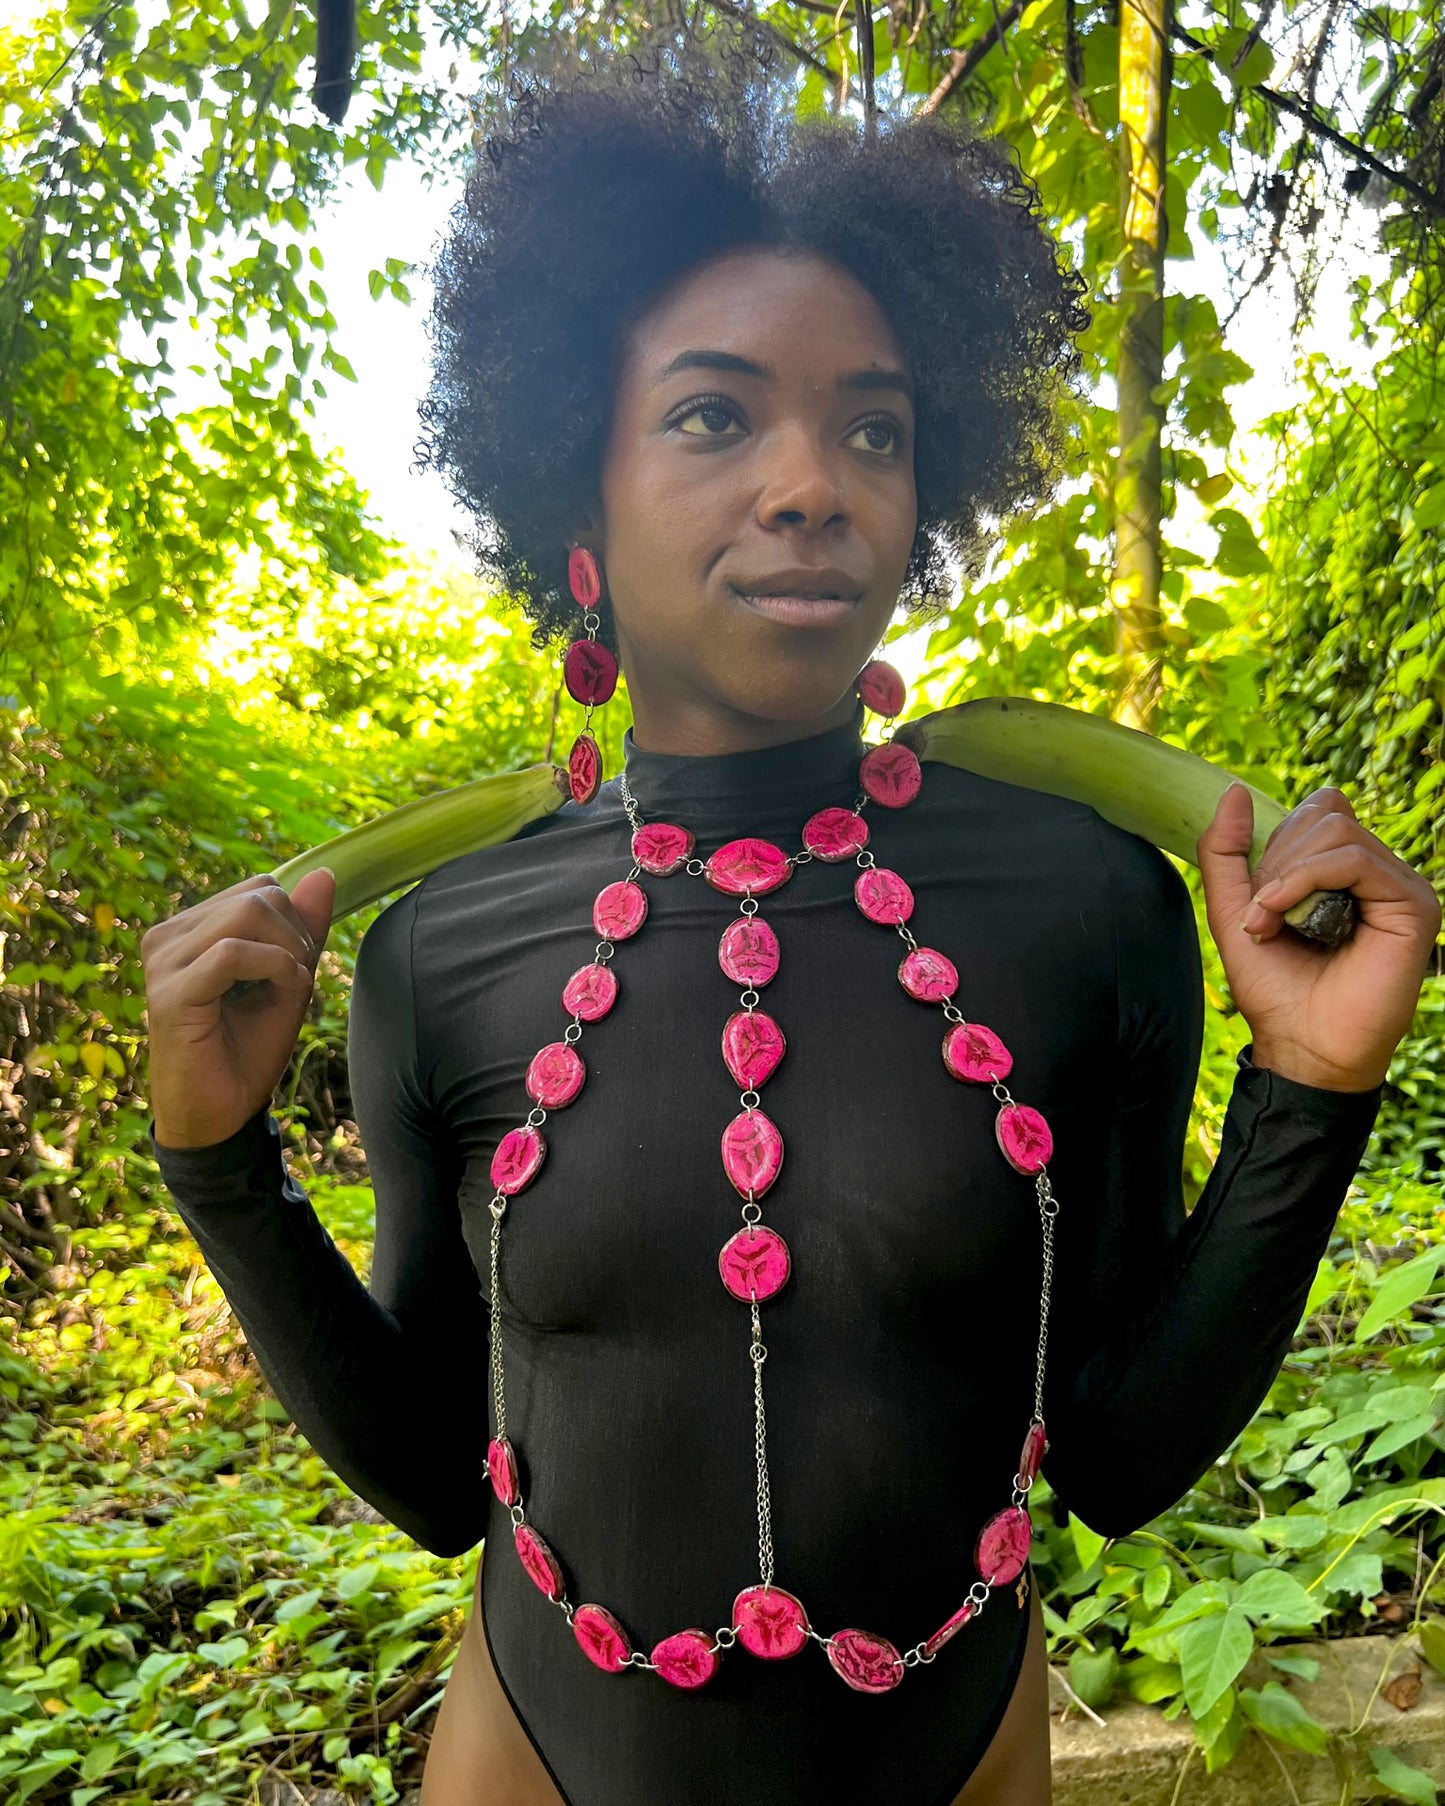 "Hot Pink Plantains" Body Jewelry